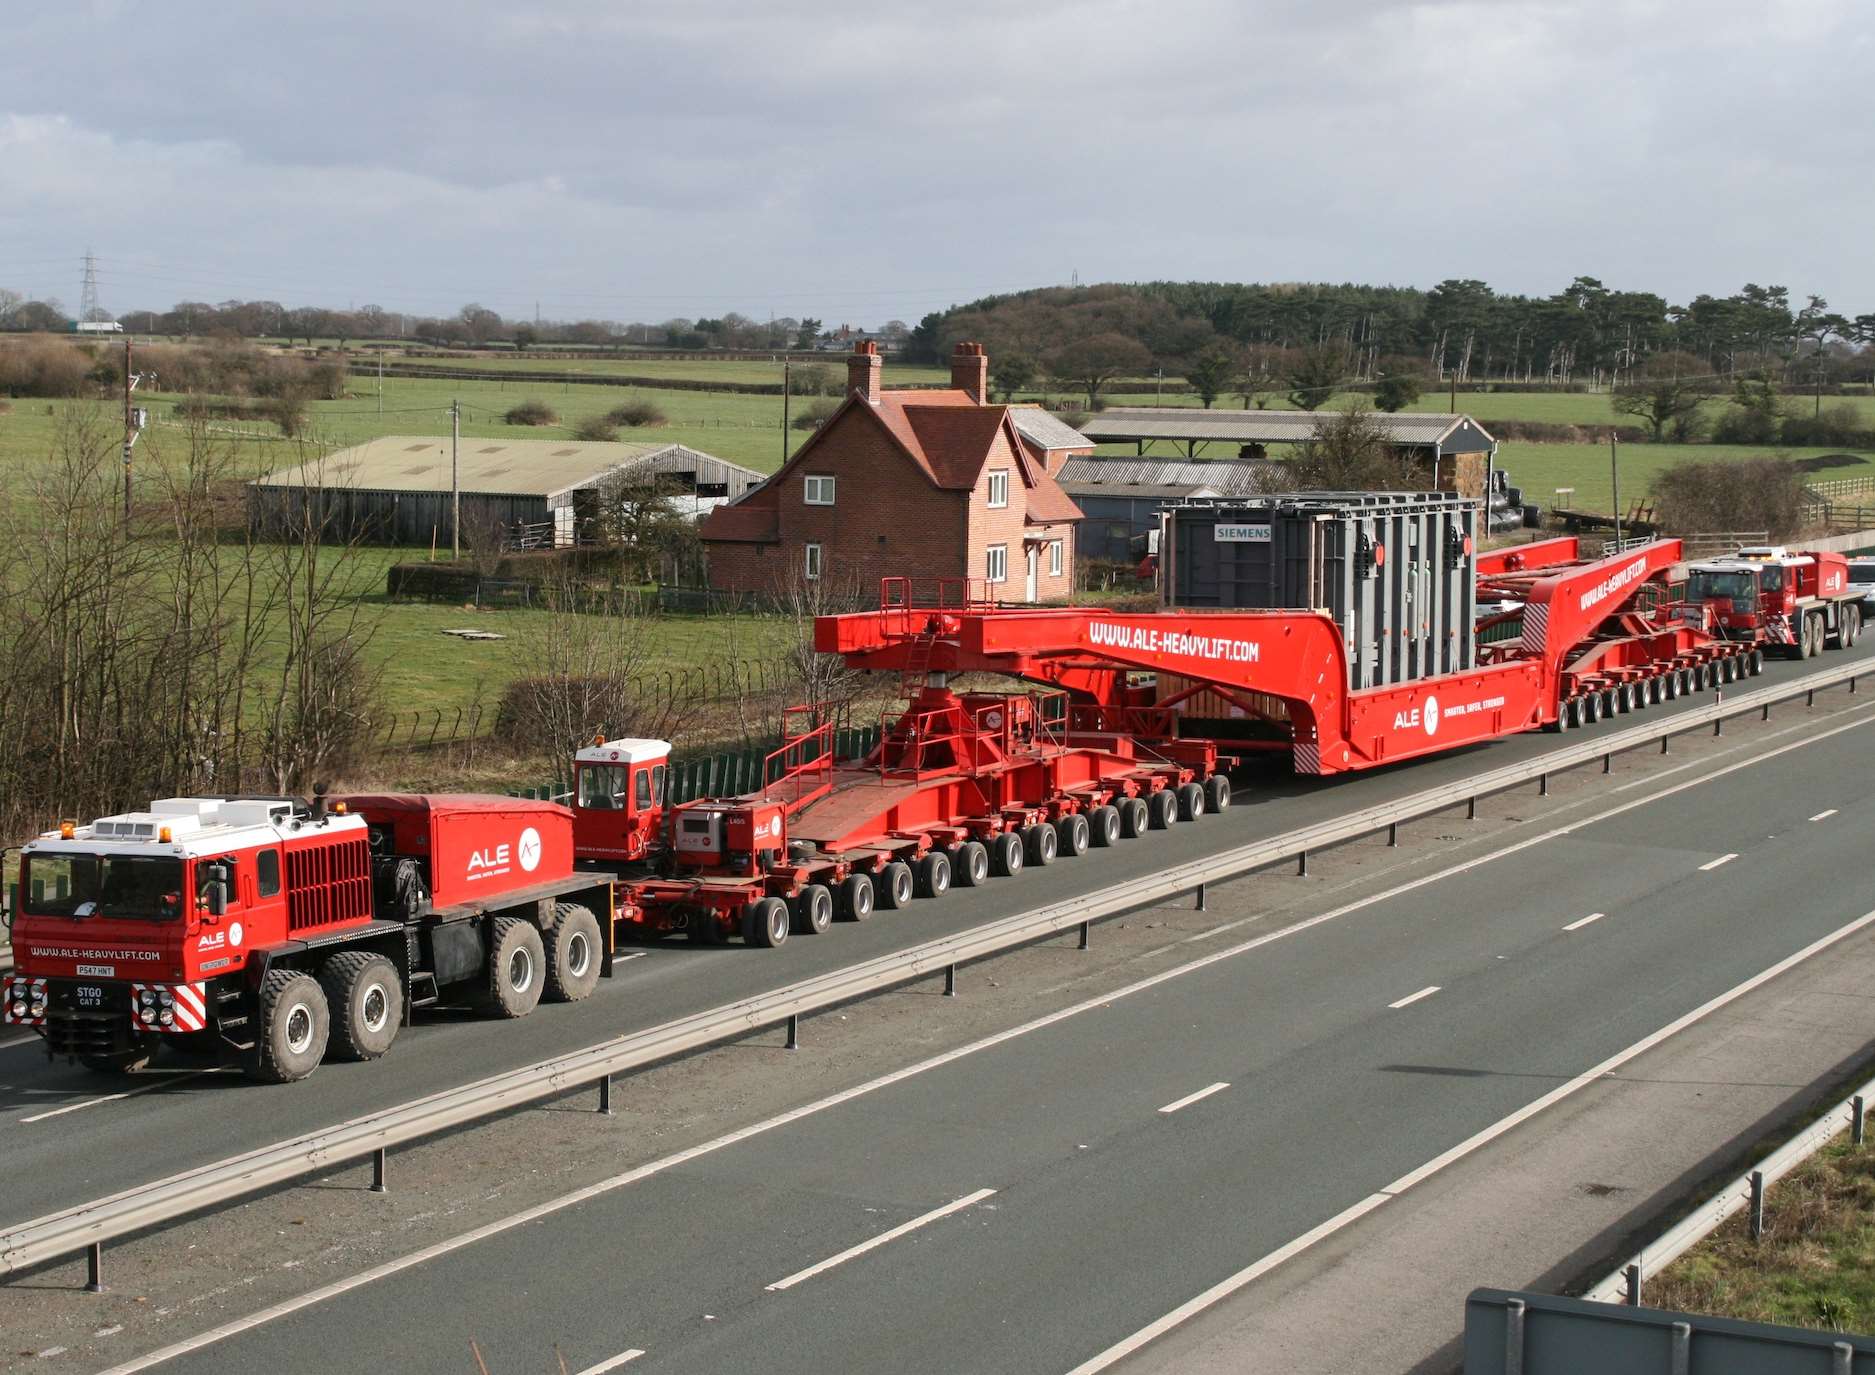 This is what a typical delivery convoy for a transformer looks like